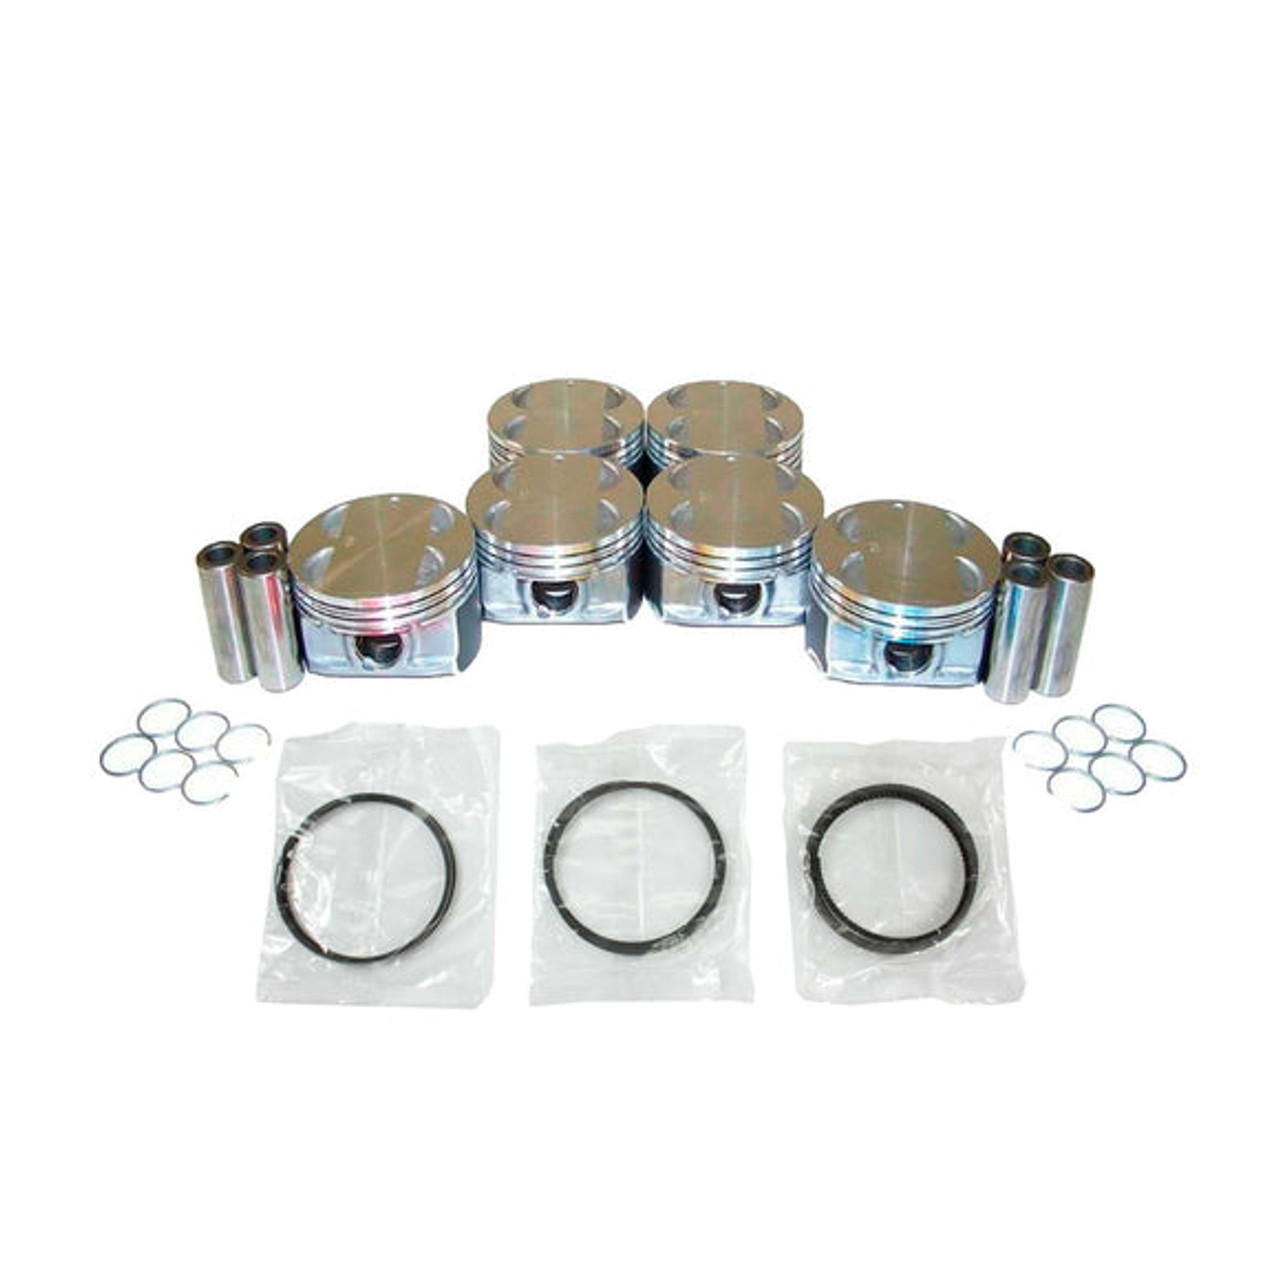 Piston Set with Rings - 2005 Cadillac STS 3.6L Engine Parts # PRK3136ZE41